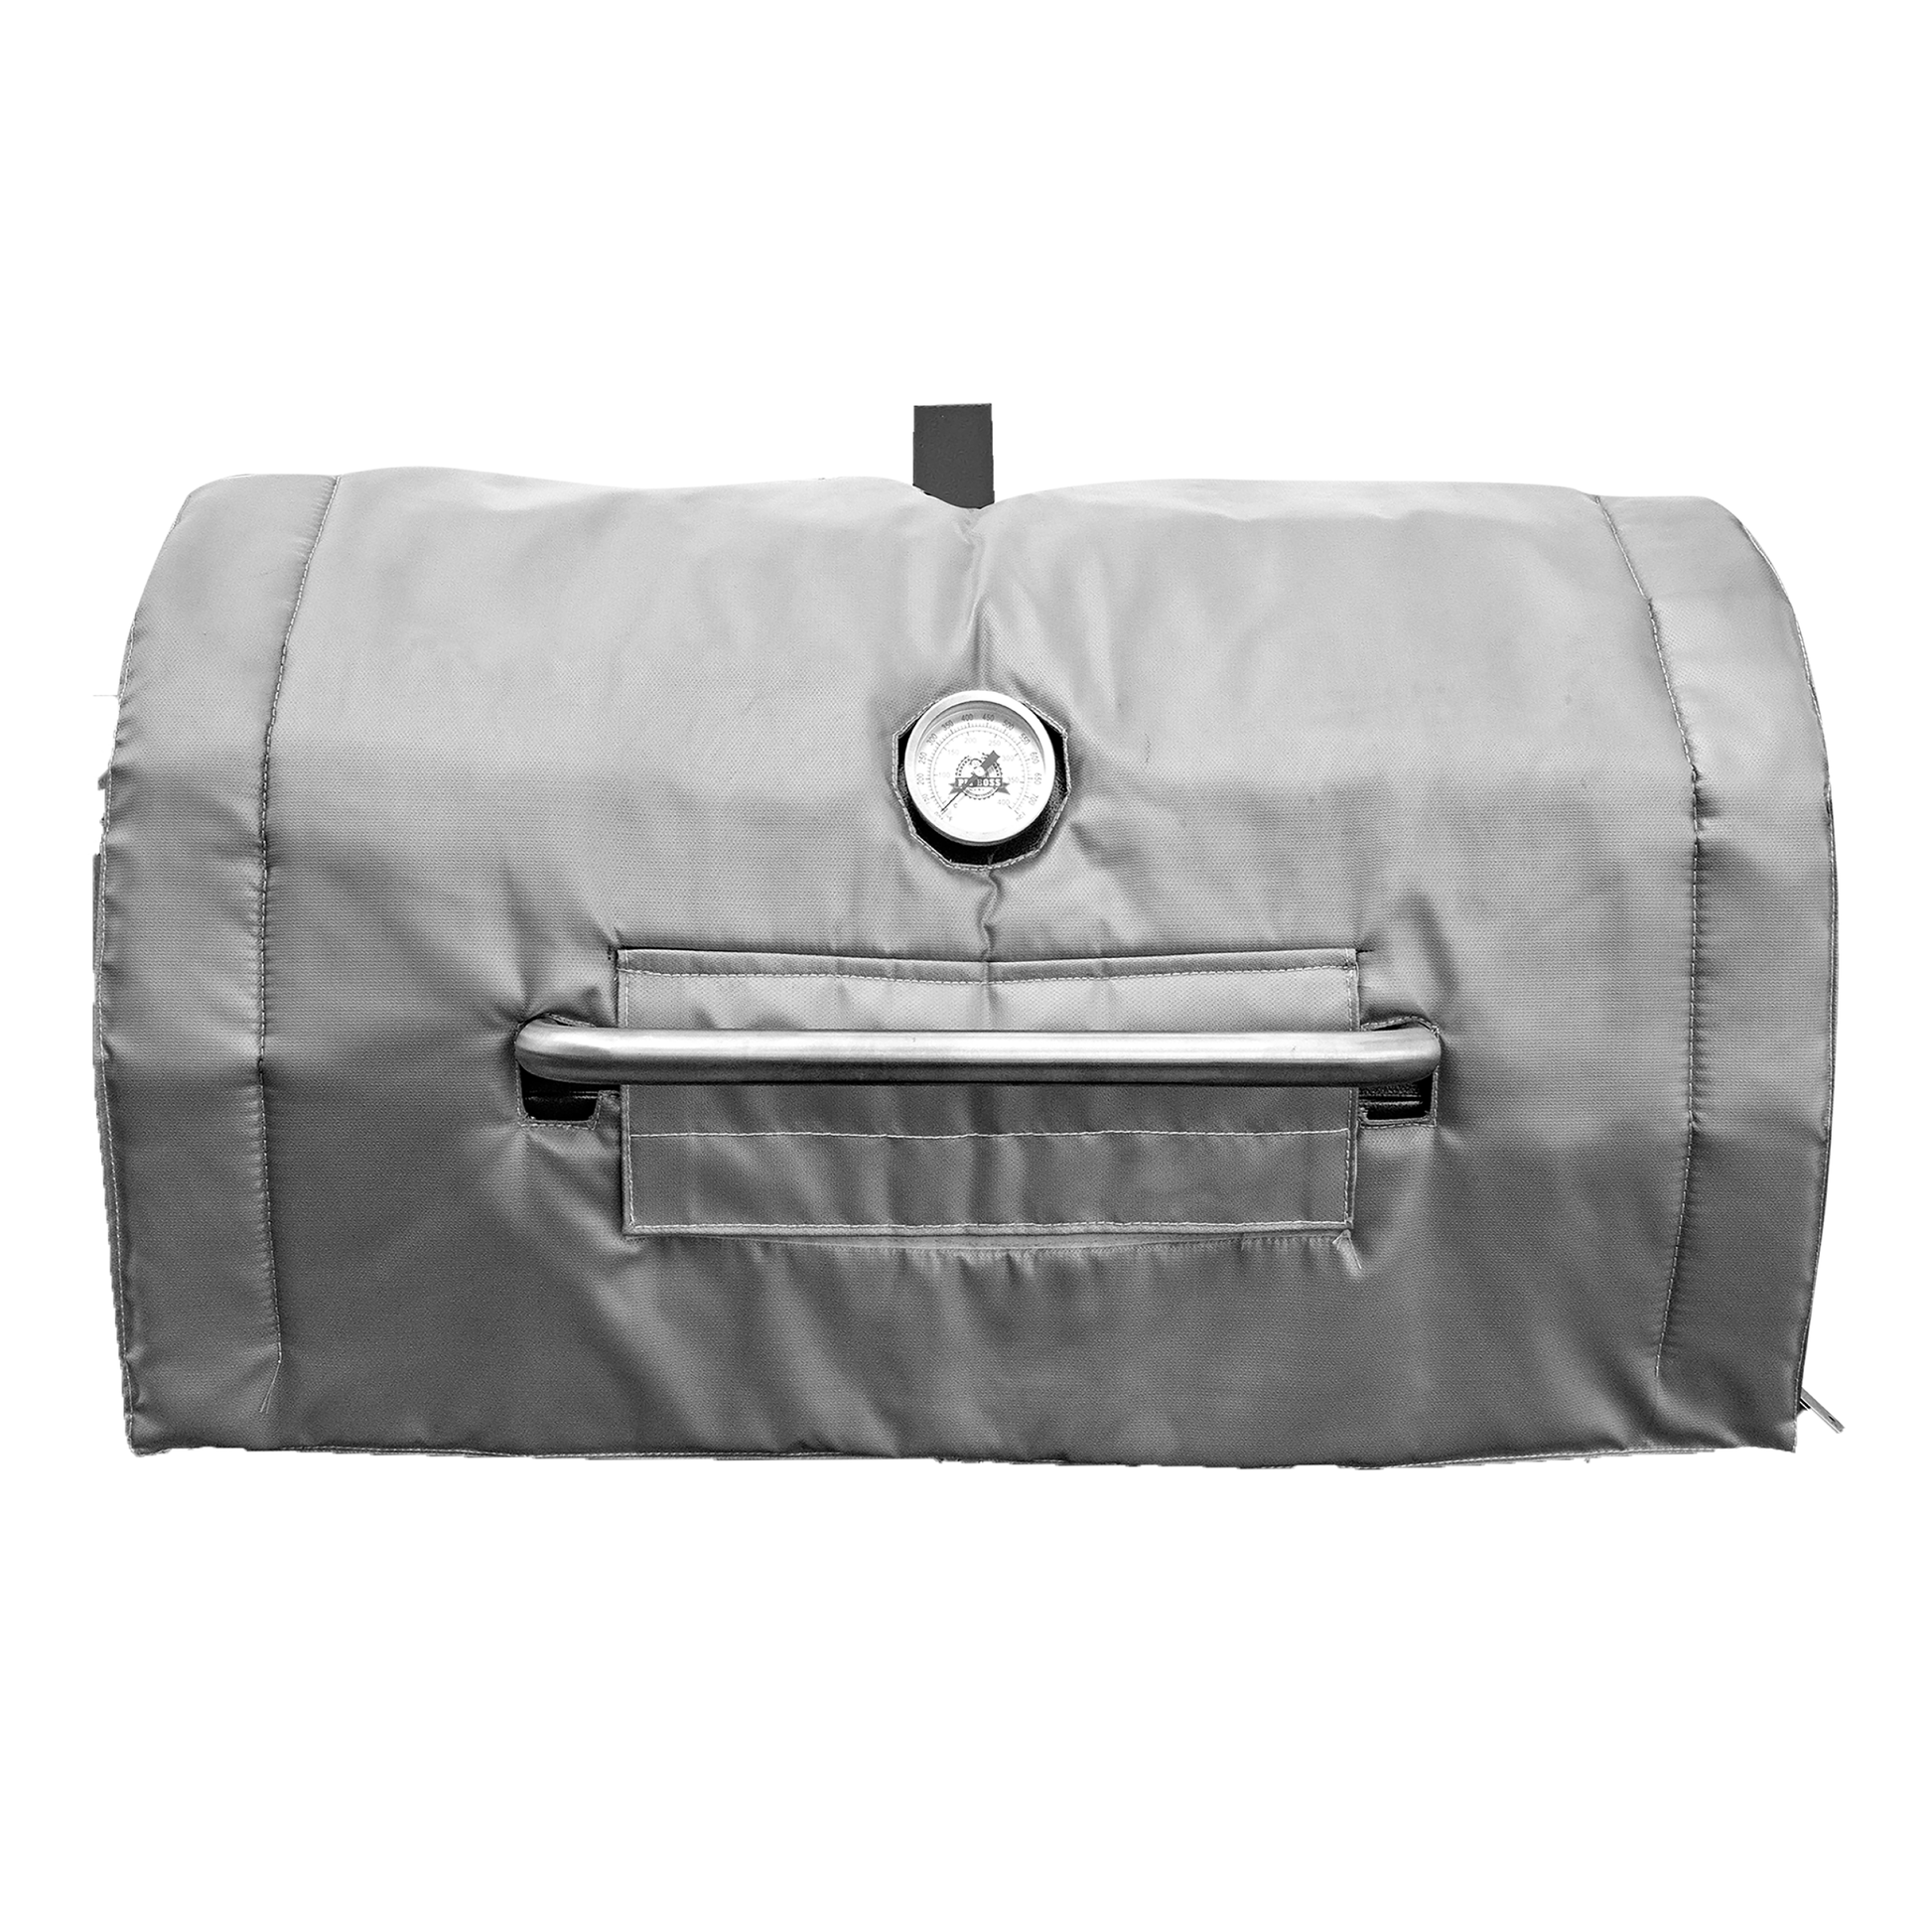 Pit Boss Insulated Grill Blanket - 700 Series